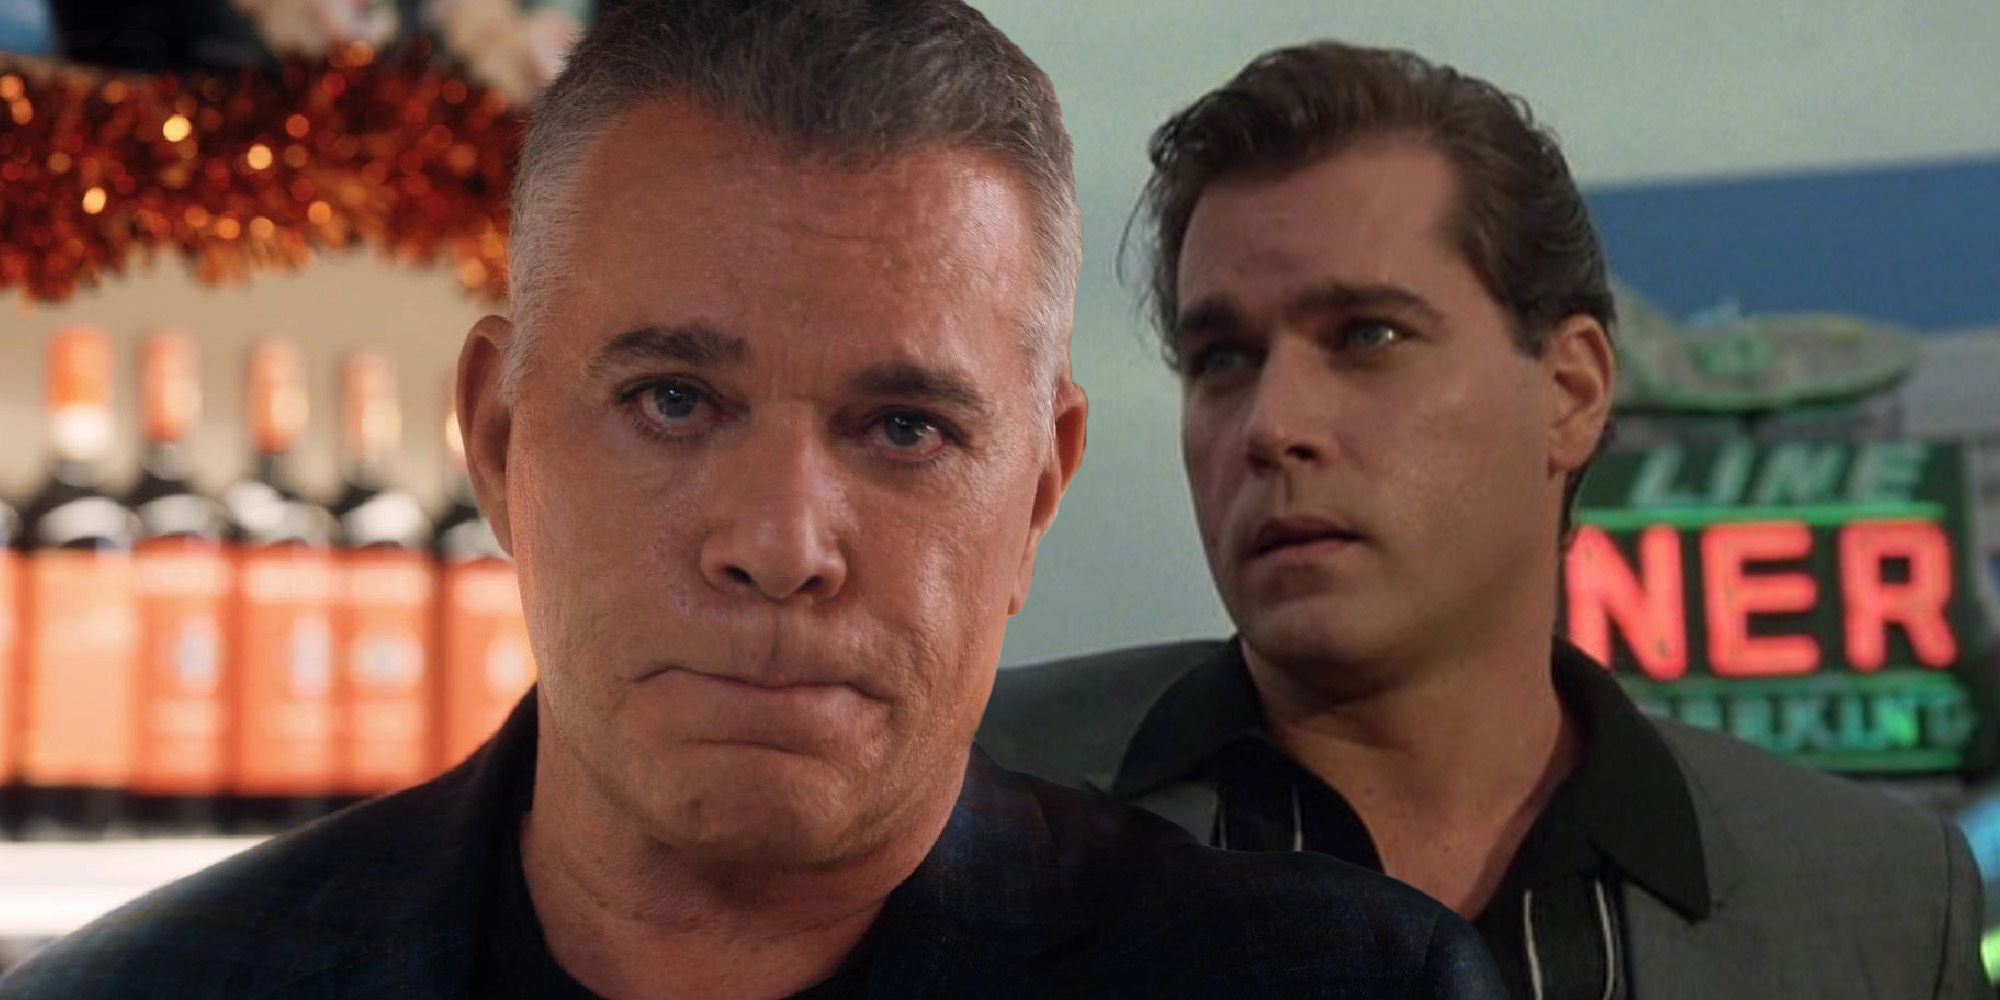 What Ray Liotta Has Done Since Goodfellas